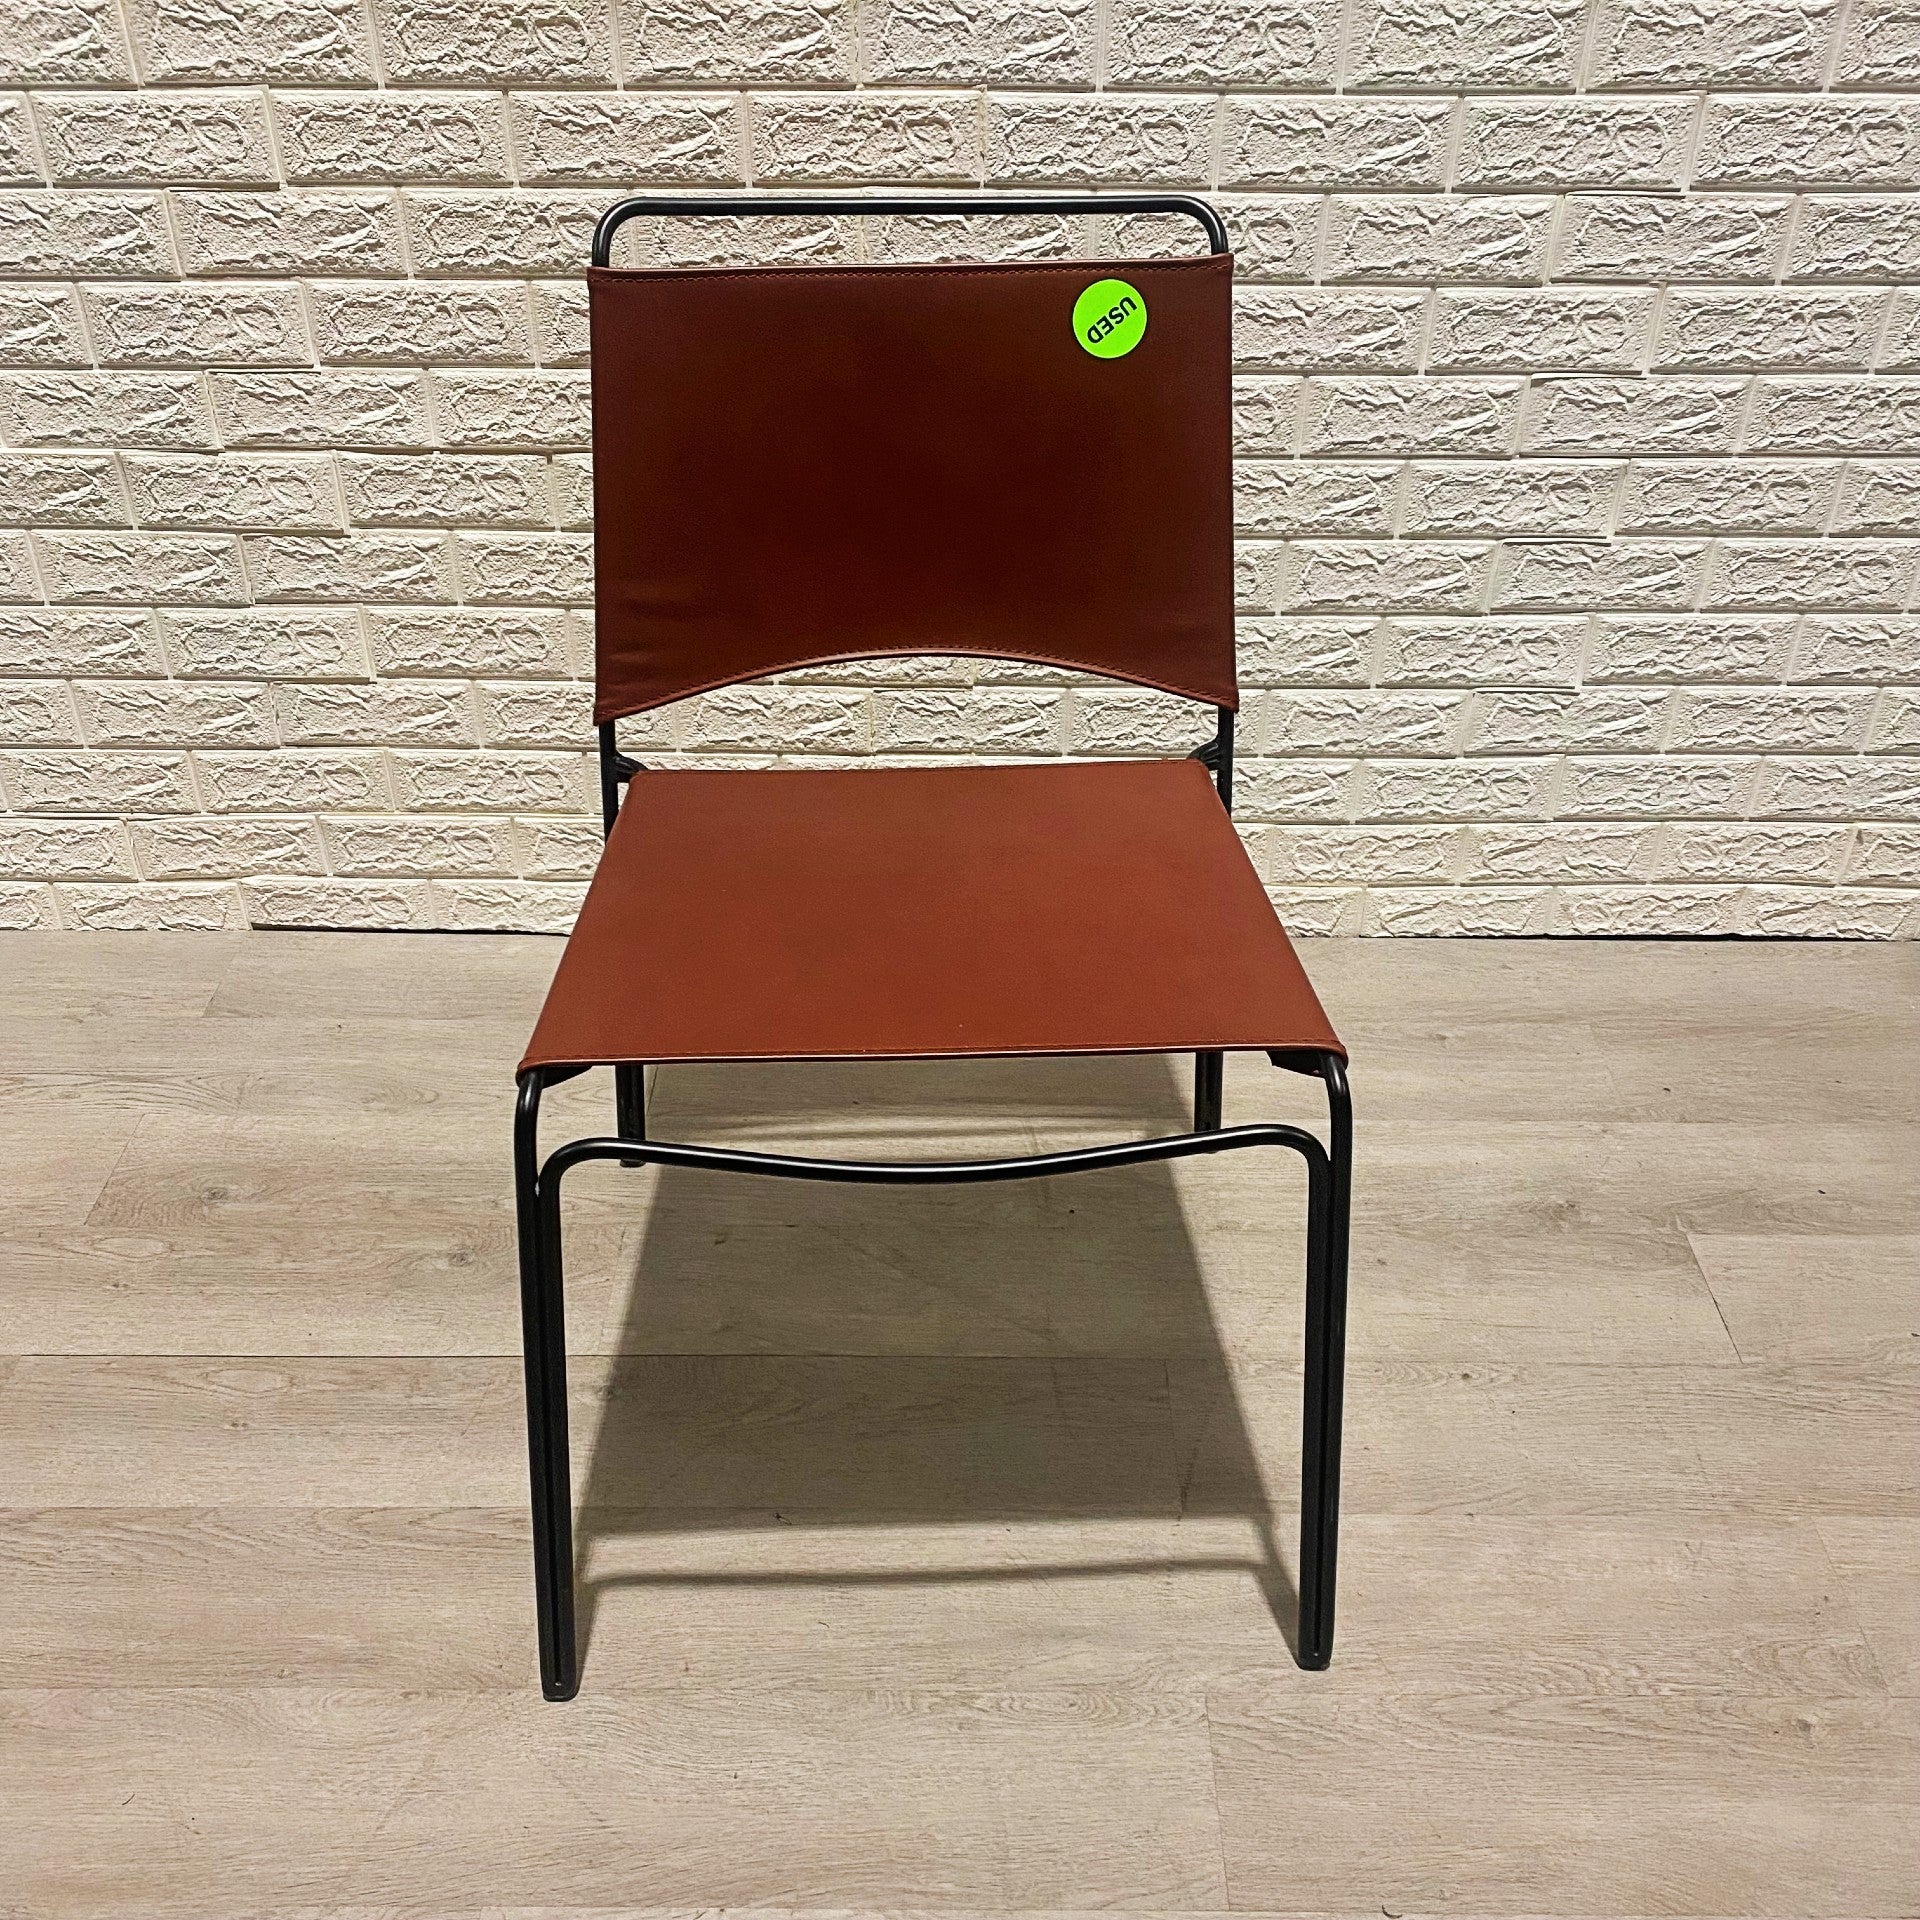 Pre-Owned M.A.D Trace Dining Chair - Duckys Office Furniture